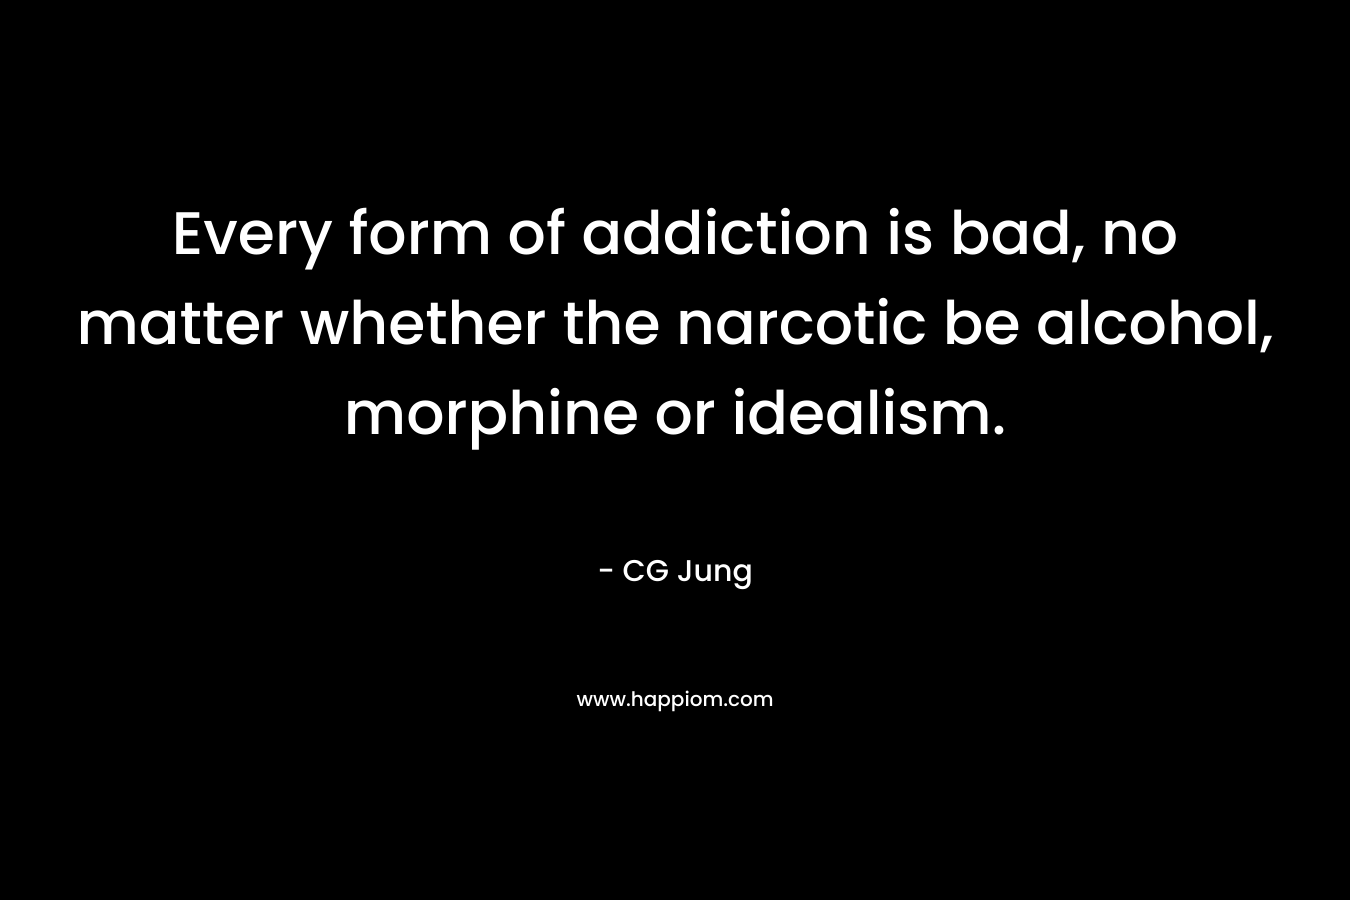 Every form of addiction is bad, no matter whether the narcotic be alcohol, morphine or idealism.